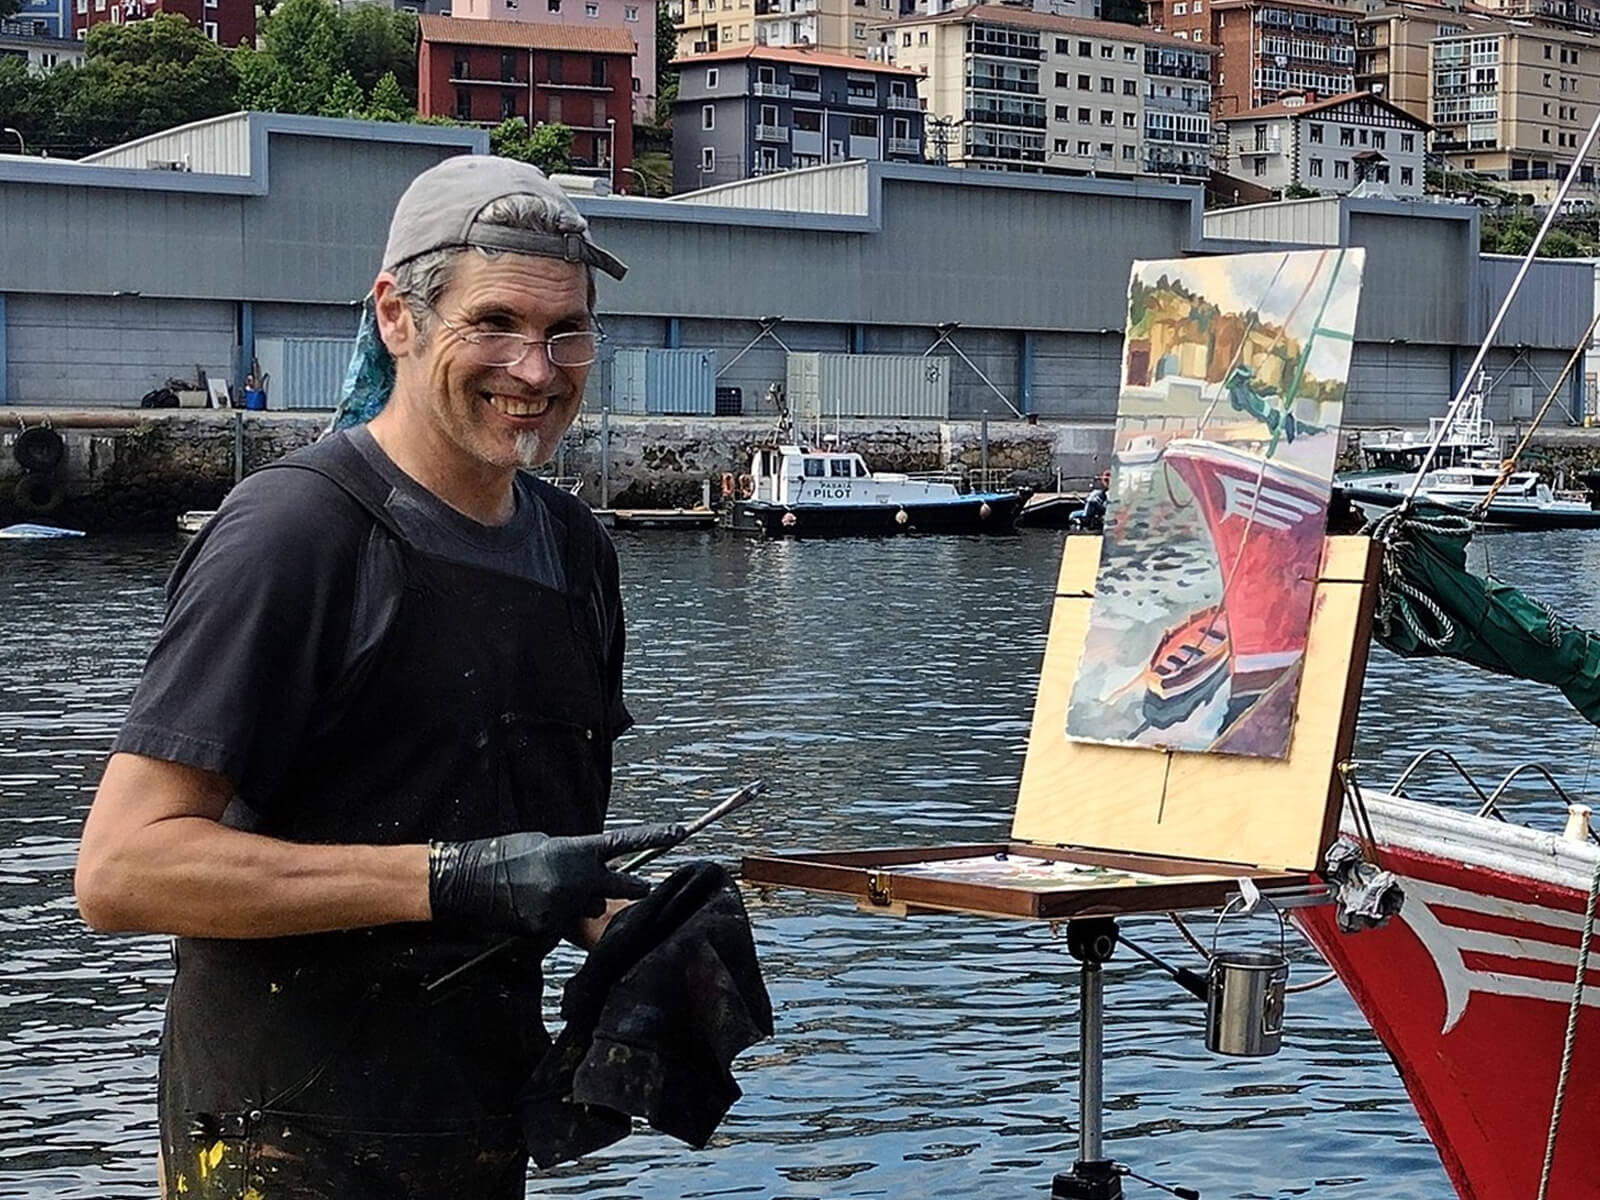 Steffon Moody stands and smiles as he paints the surrounding harbor and boat onto his canvas